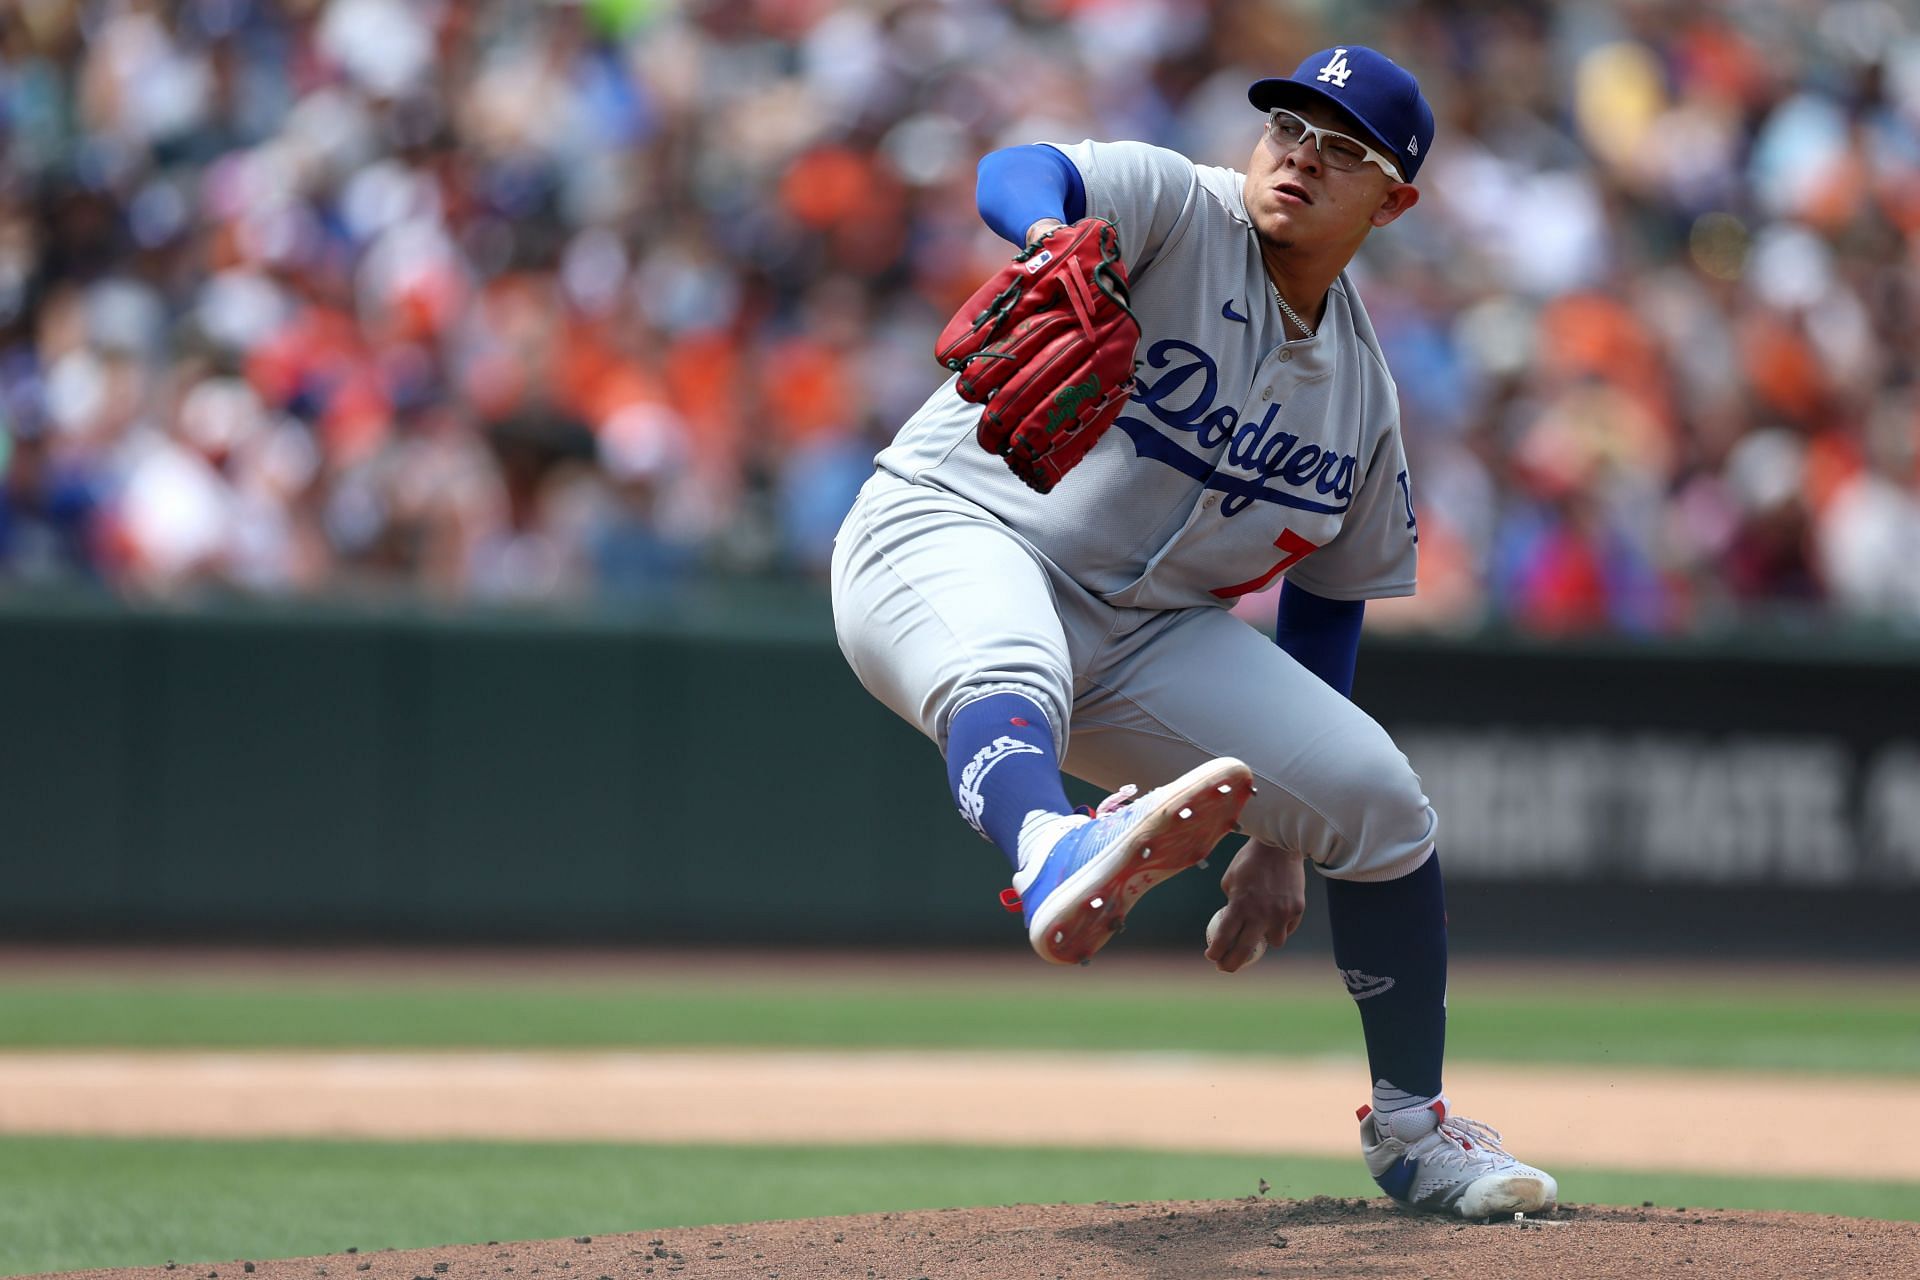 Julio Urias, born in 1996 is one of the last rising stars ever to have a game announced by Scully.